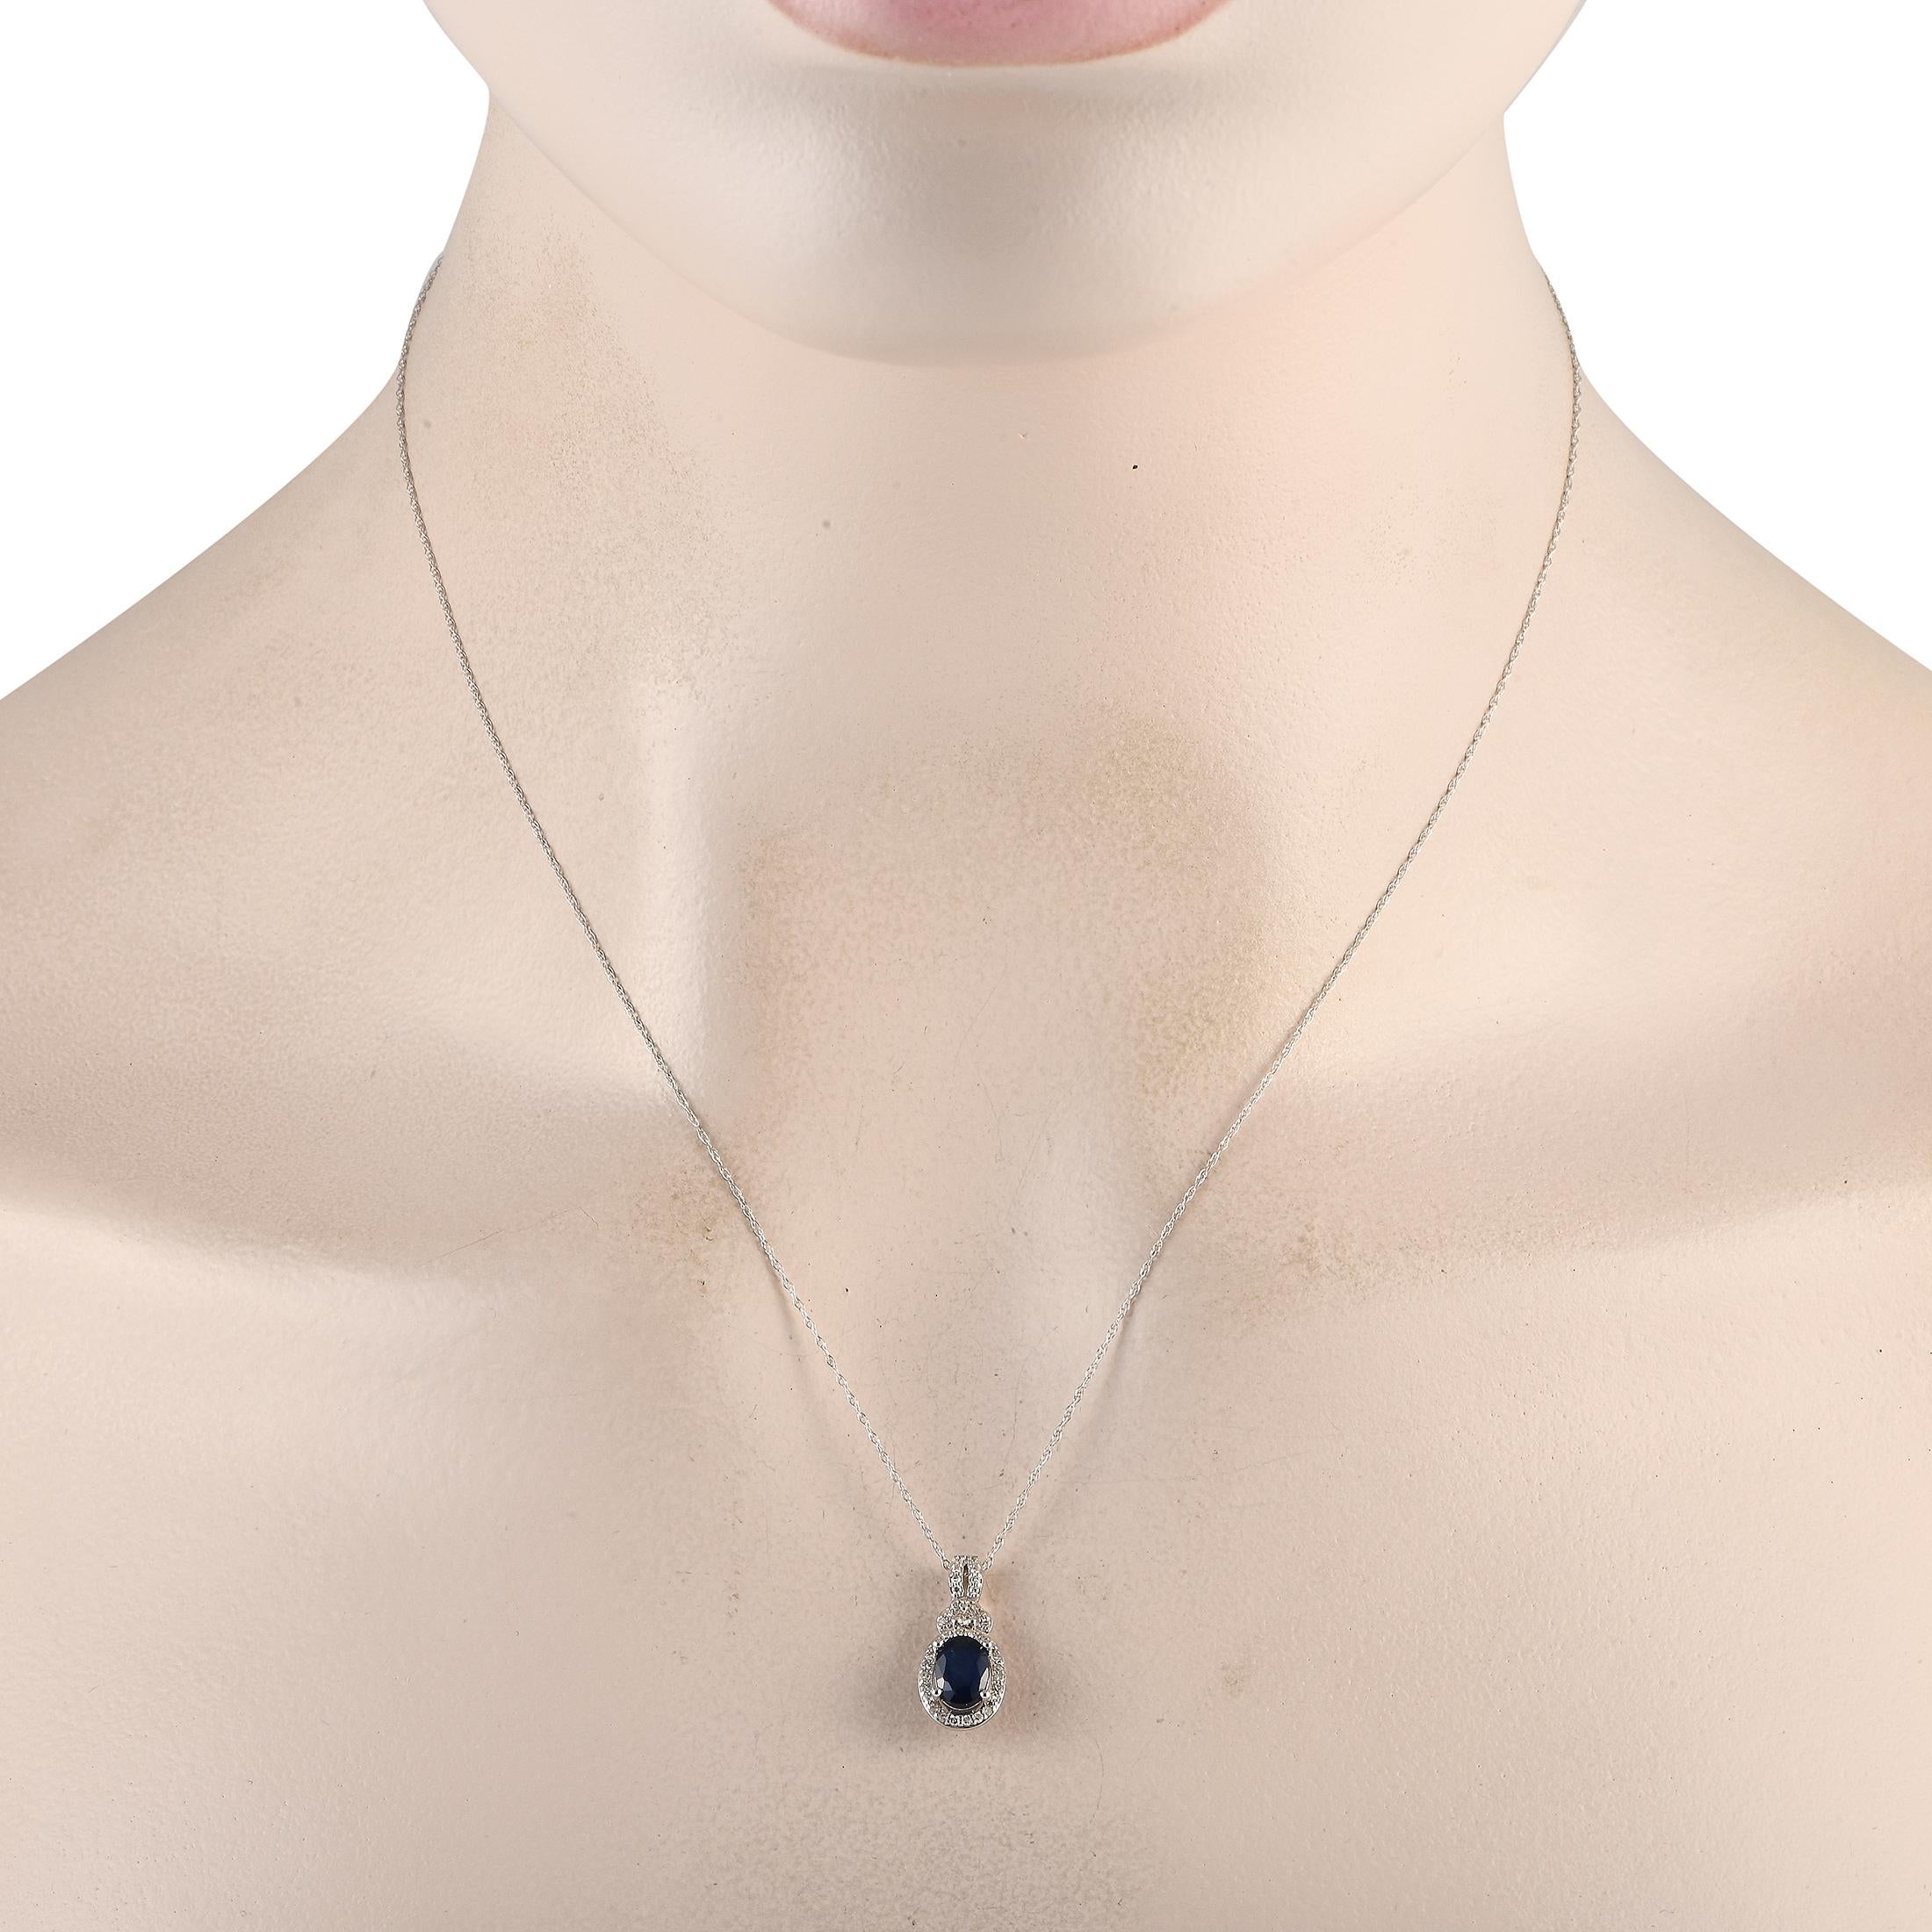 This necklace is a luxury piece that is ideal for any occasion. Sleek and elegant, the 14K white gold pendant measures 0.75 long by 0.35 wide and is suspended from a delicate 18 chain. Sparkling diamonds with a total weight of 0.15 carats